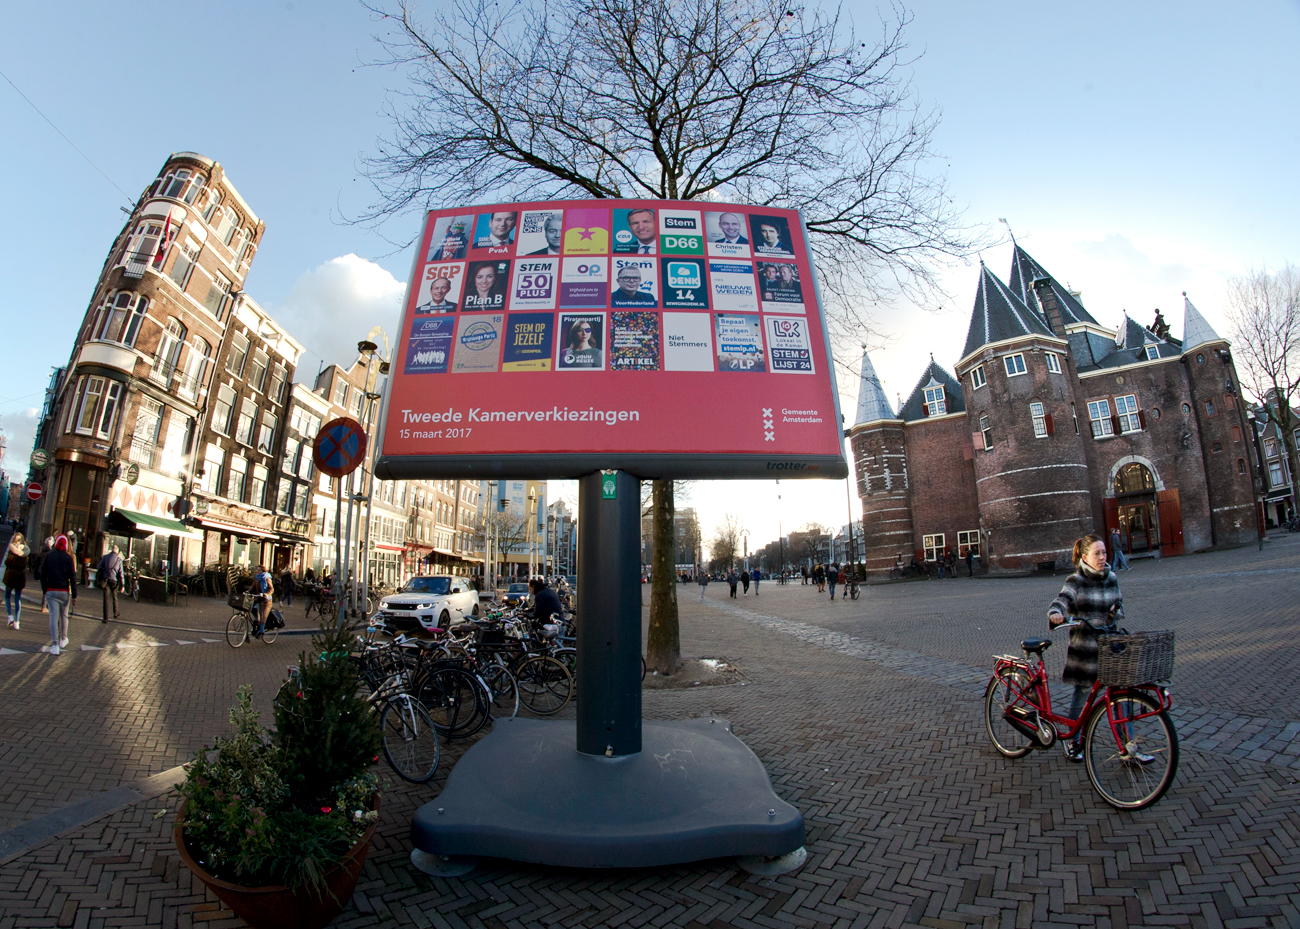 An election billboard is out up in a square in the center of Amsterdam, Netherlands, Feb. 24, 2017.